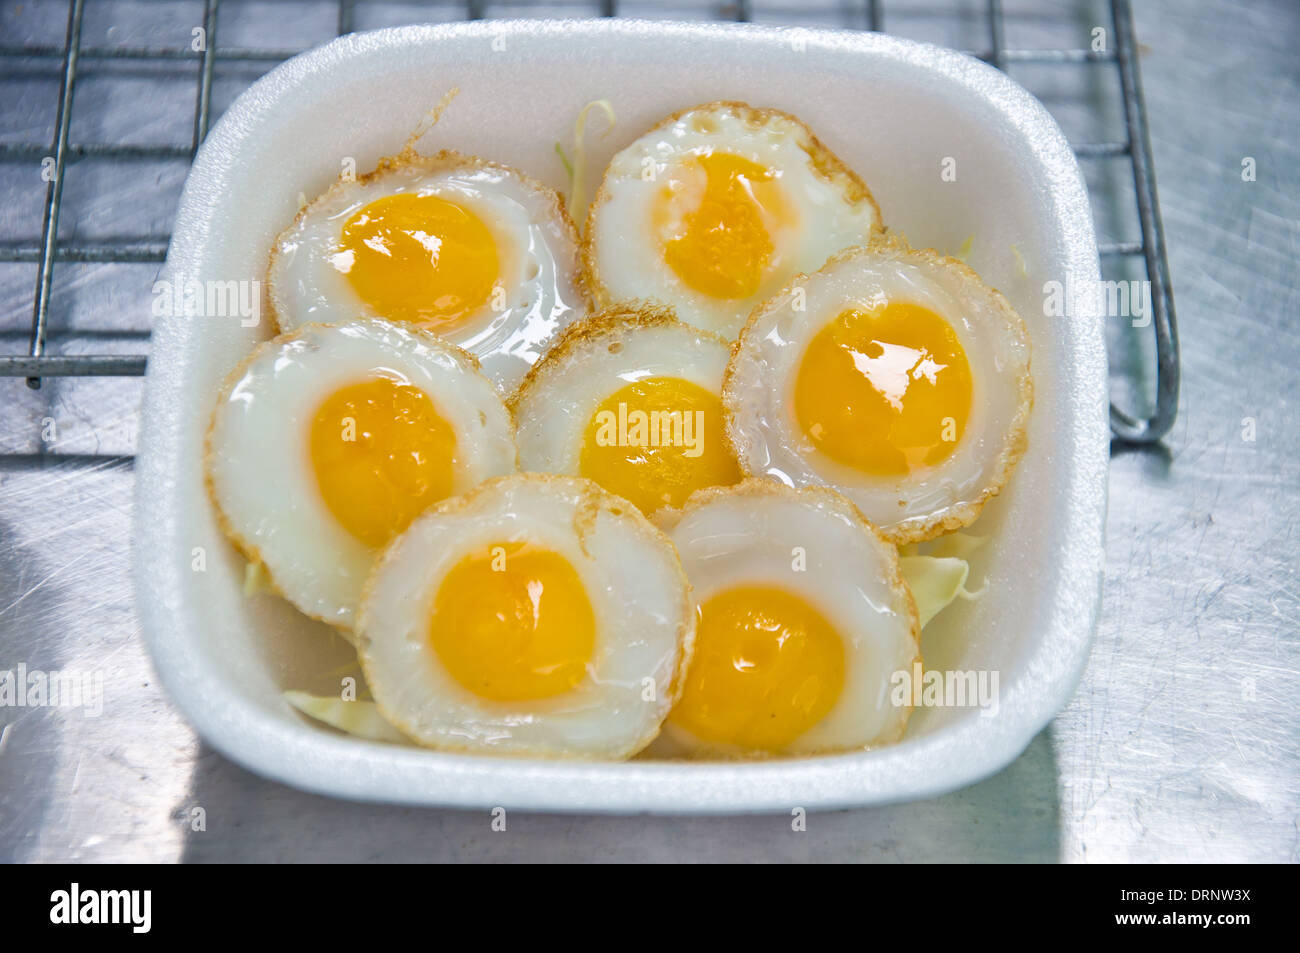 fried quail egg for healthy food Stock Photo